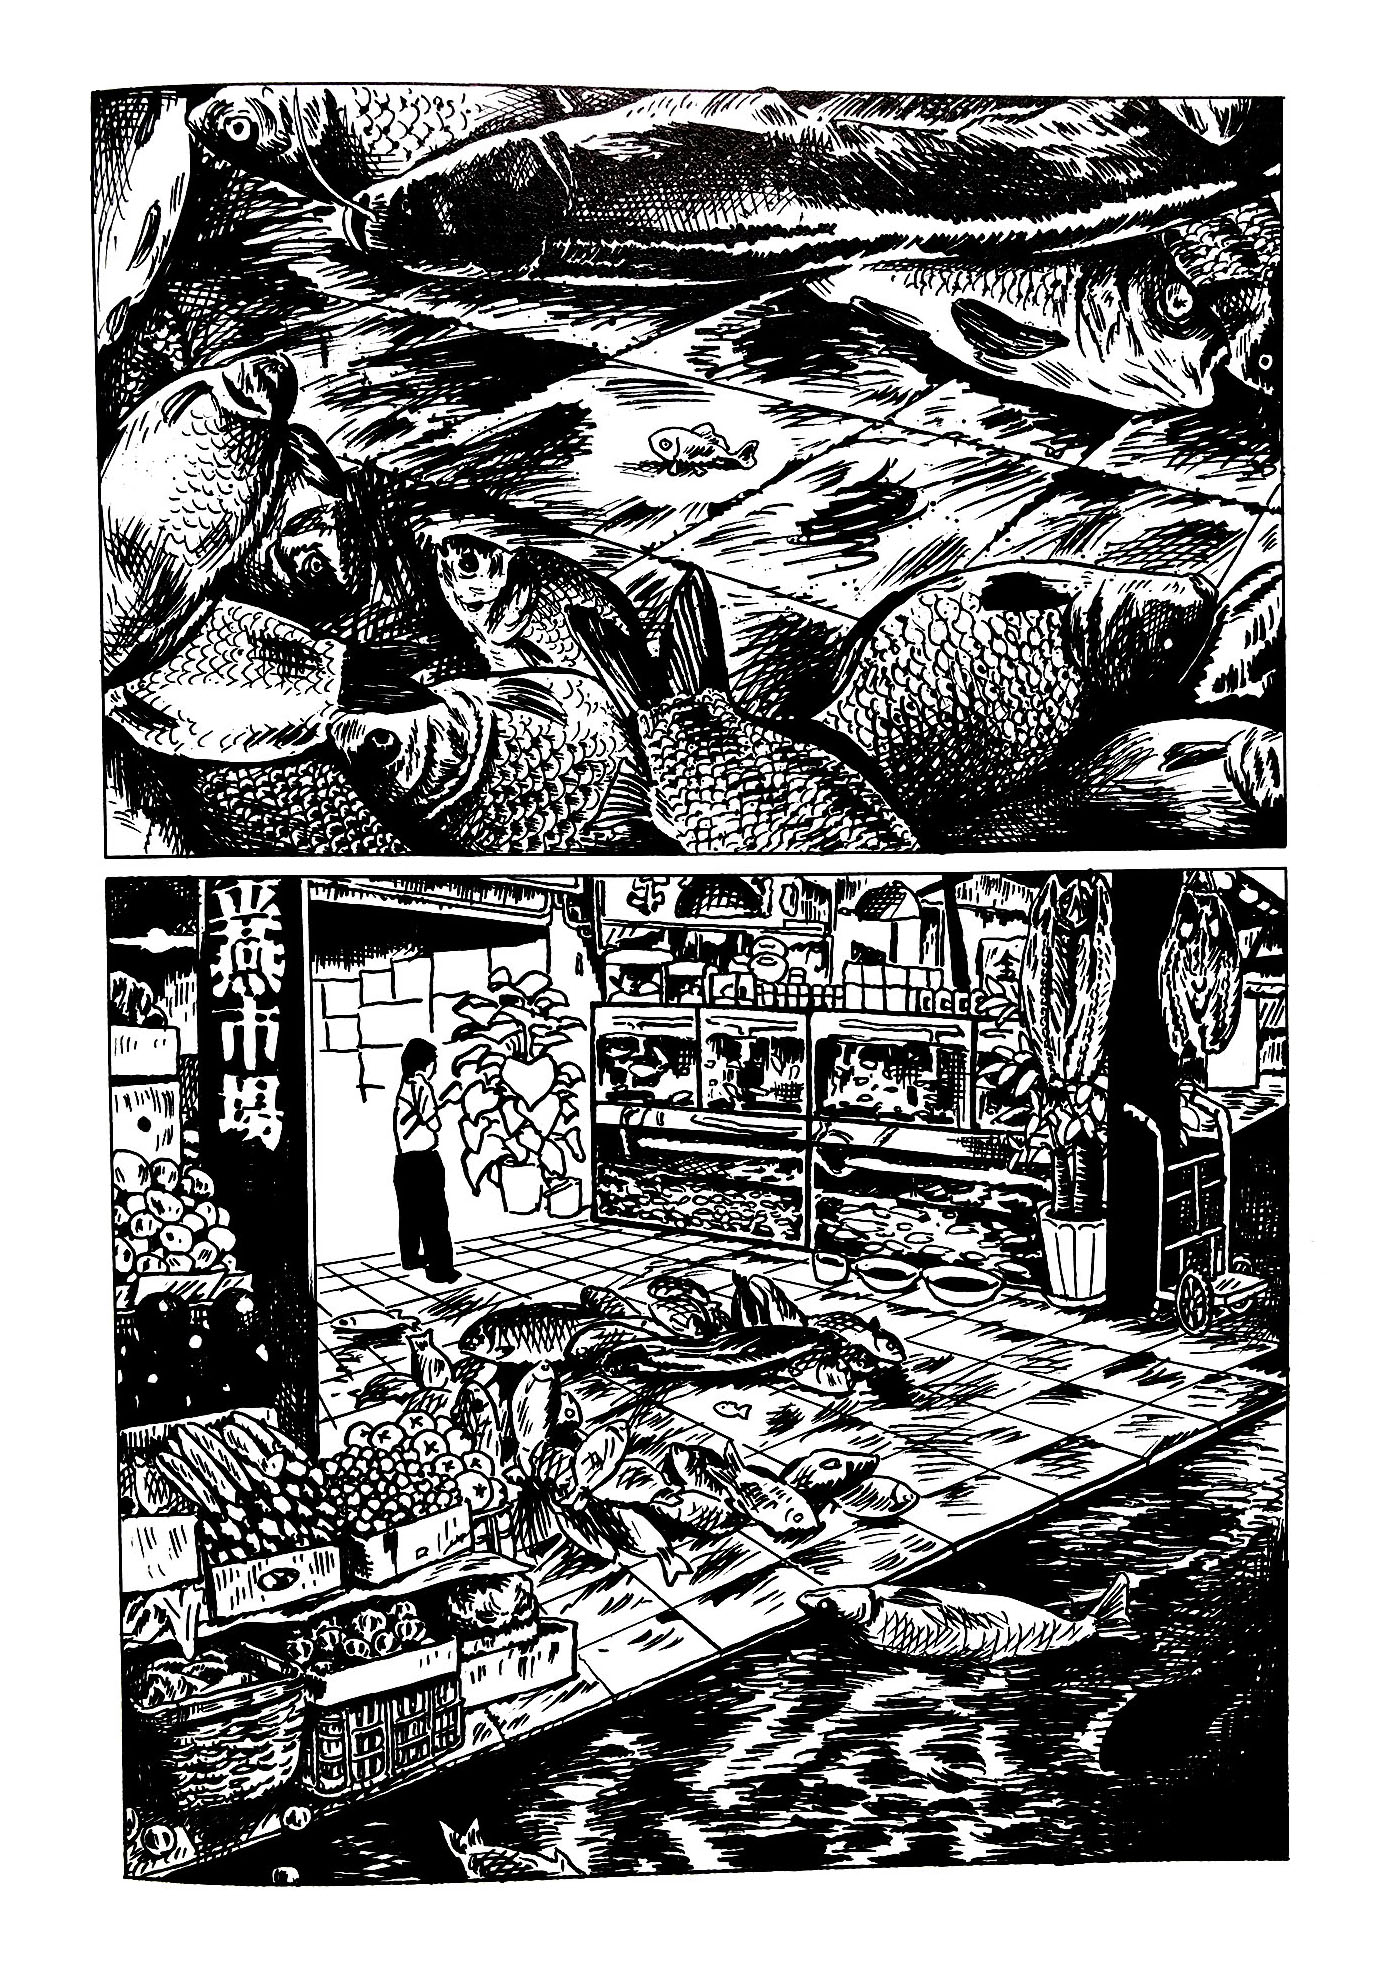 Excerpt from Night Bus showing detailed illustrations, one close up, one farther away of live fish being sold at a wet market